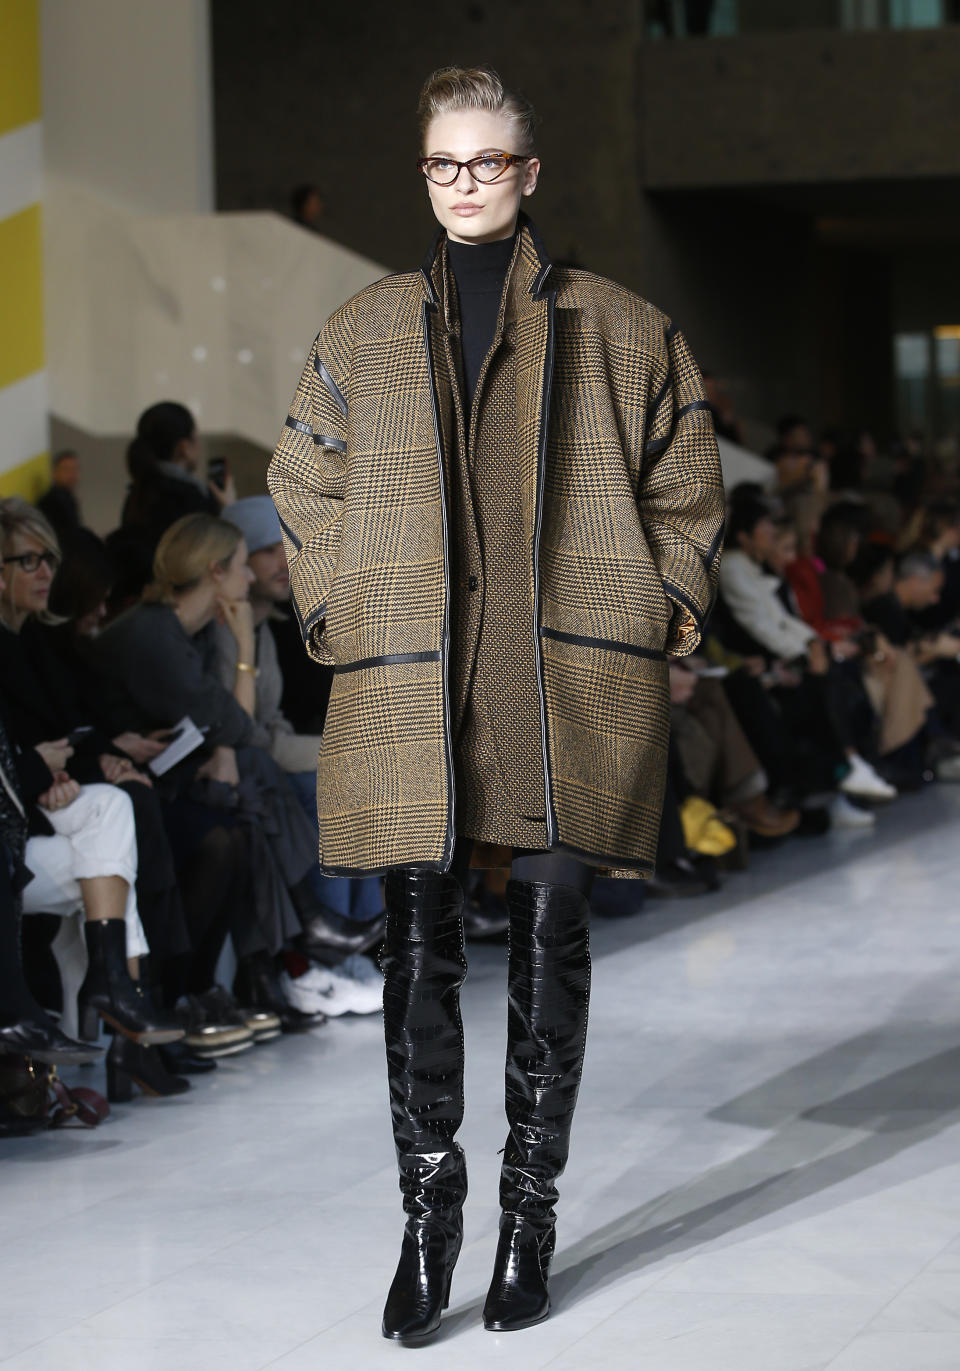 A model wears a creation as part of the Max Mara women's Fall-Winter 2019-20 collection, unveiled during the Fashion Week in Milan, Italy, Thursday, Feb. 21, 2019. (AP Photo/Antonio Calanni)